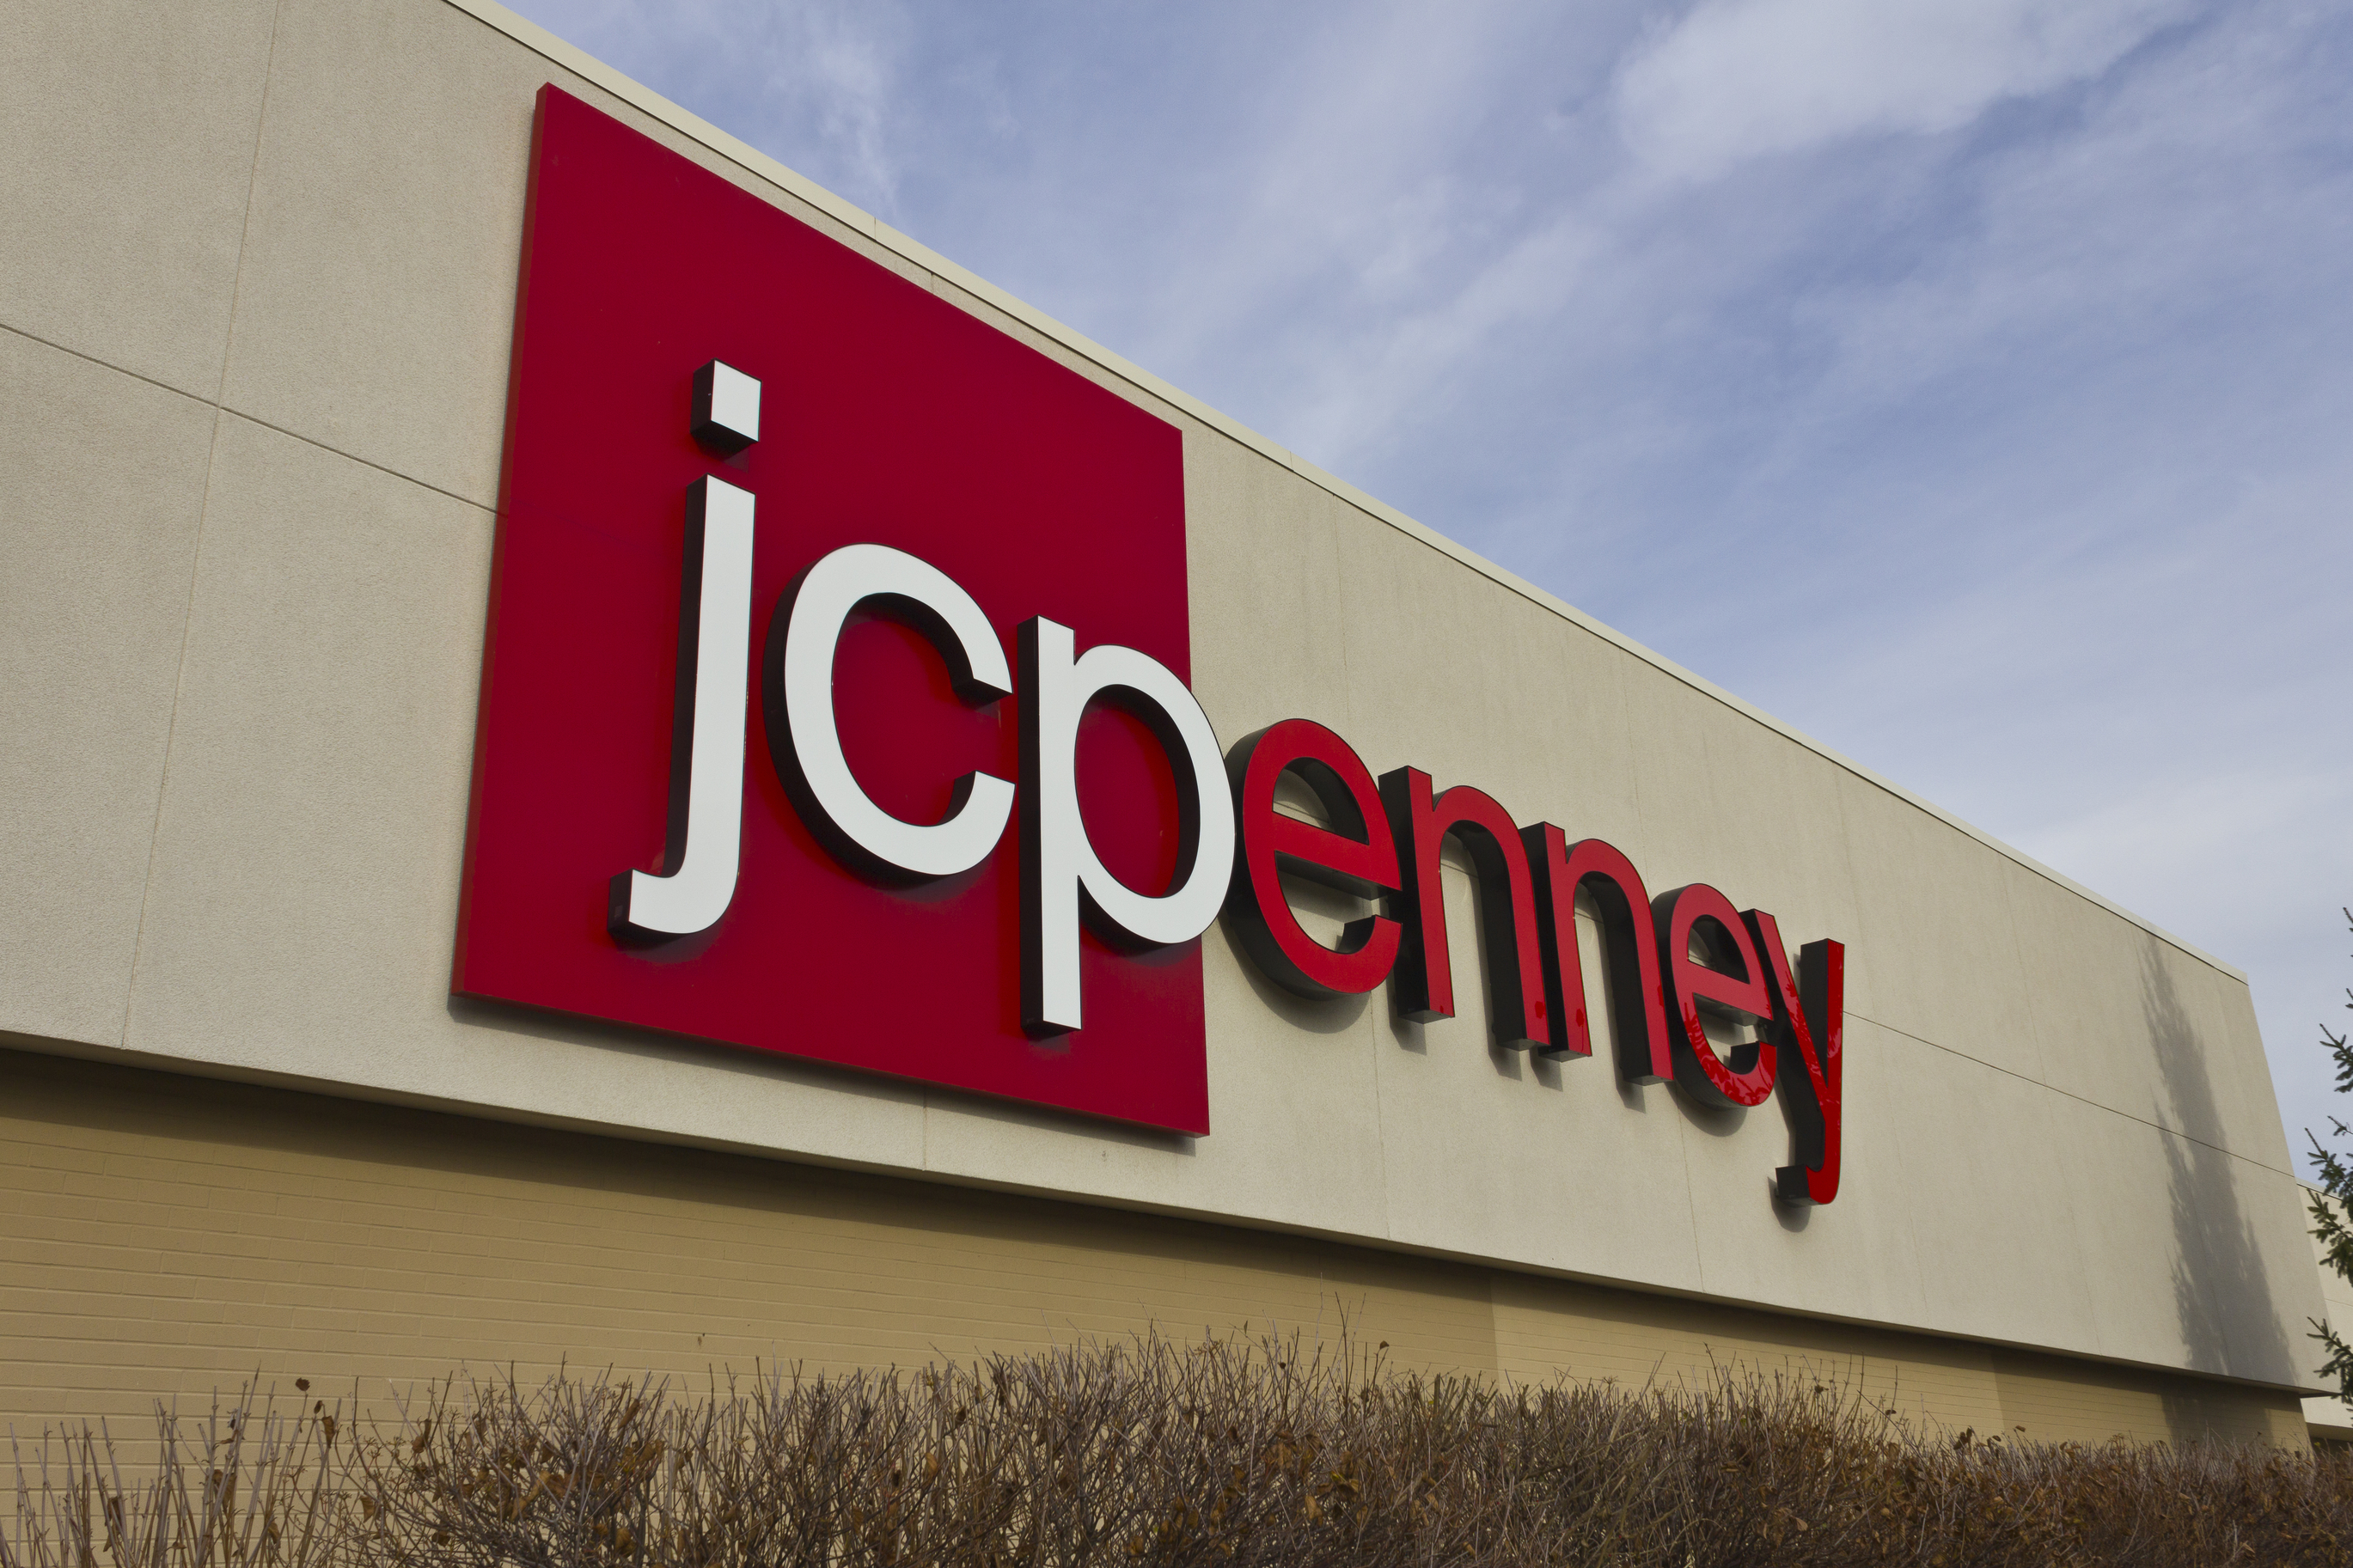 JCPenney: Save 30% off select apparel, accessories and home items